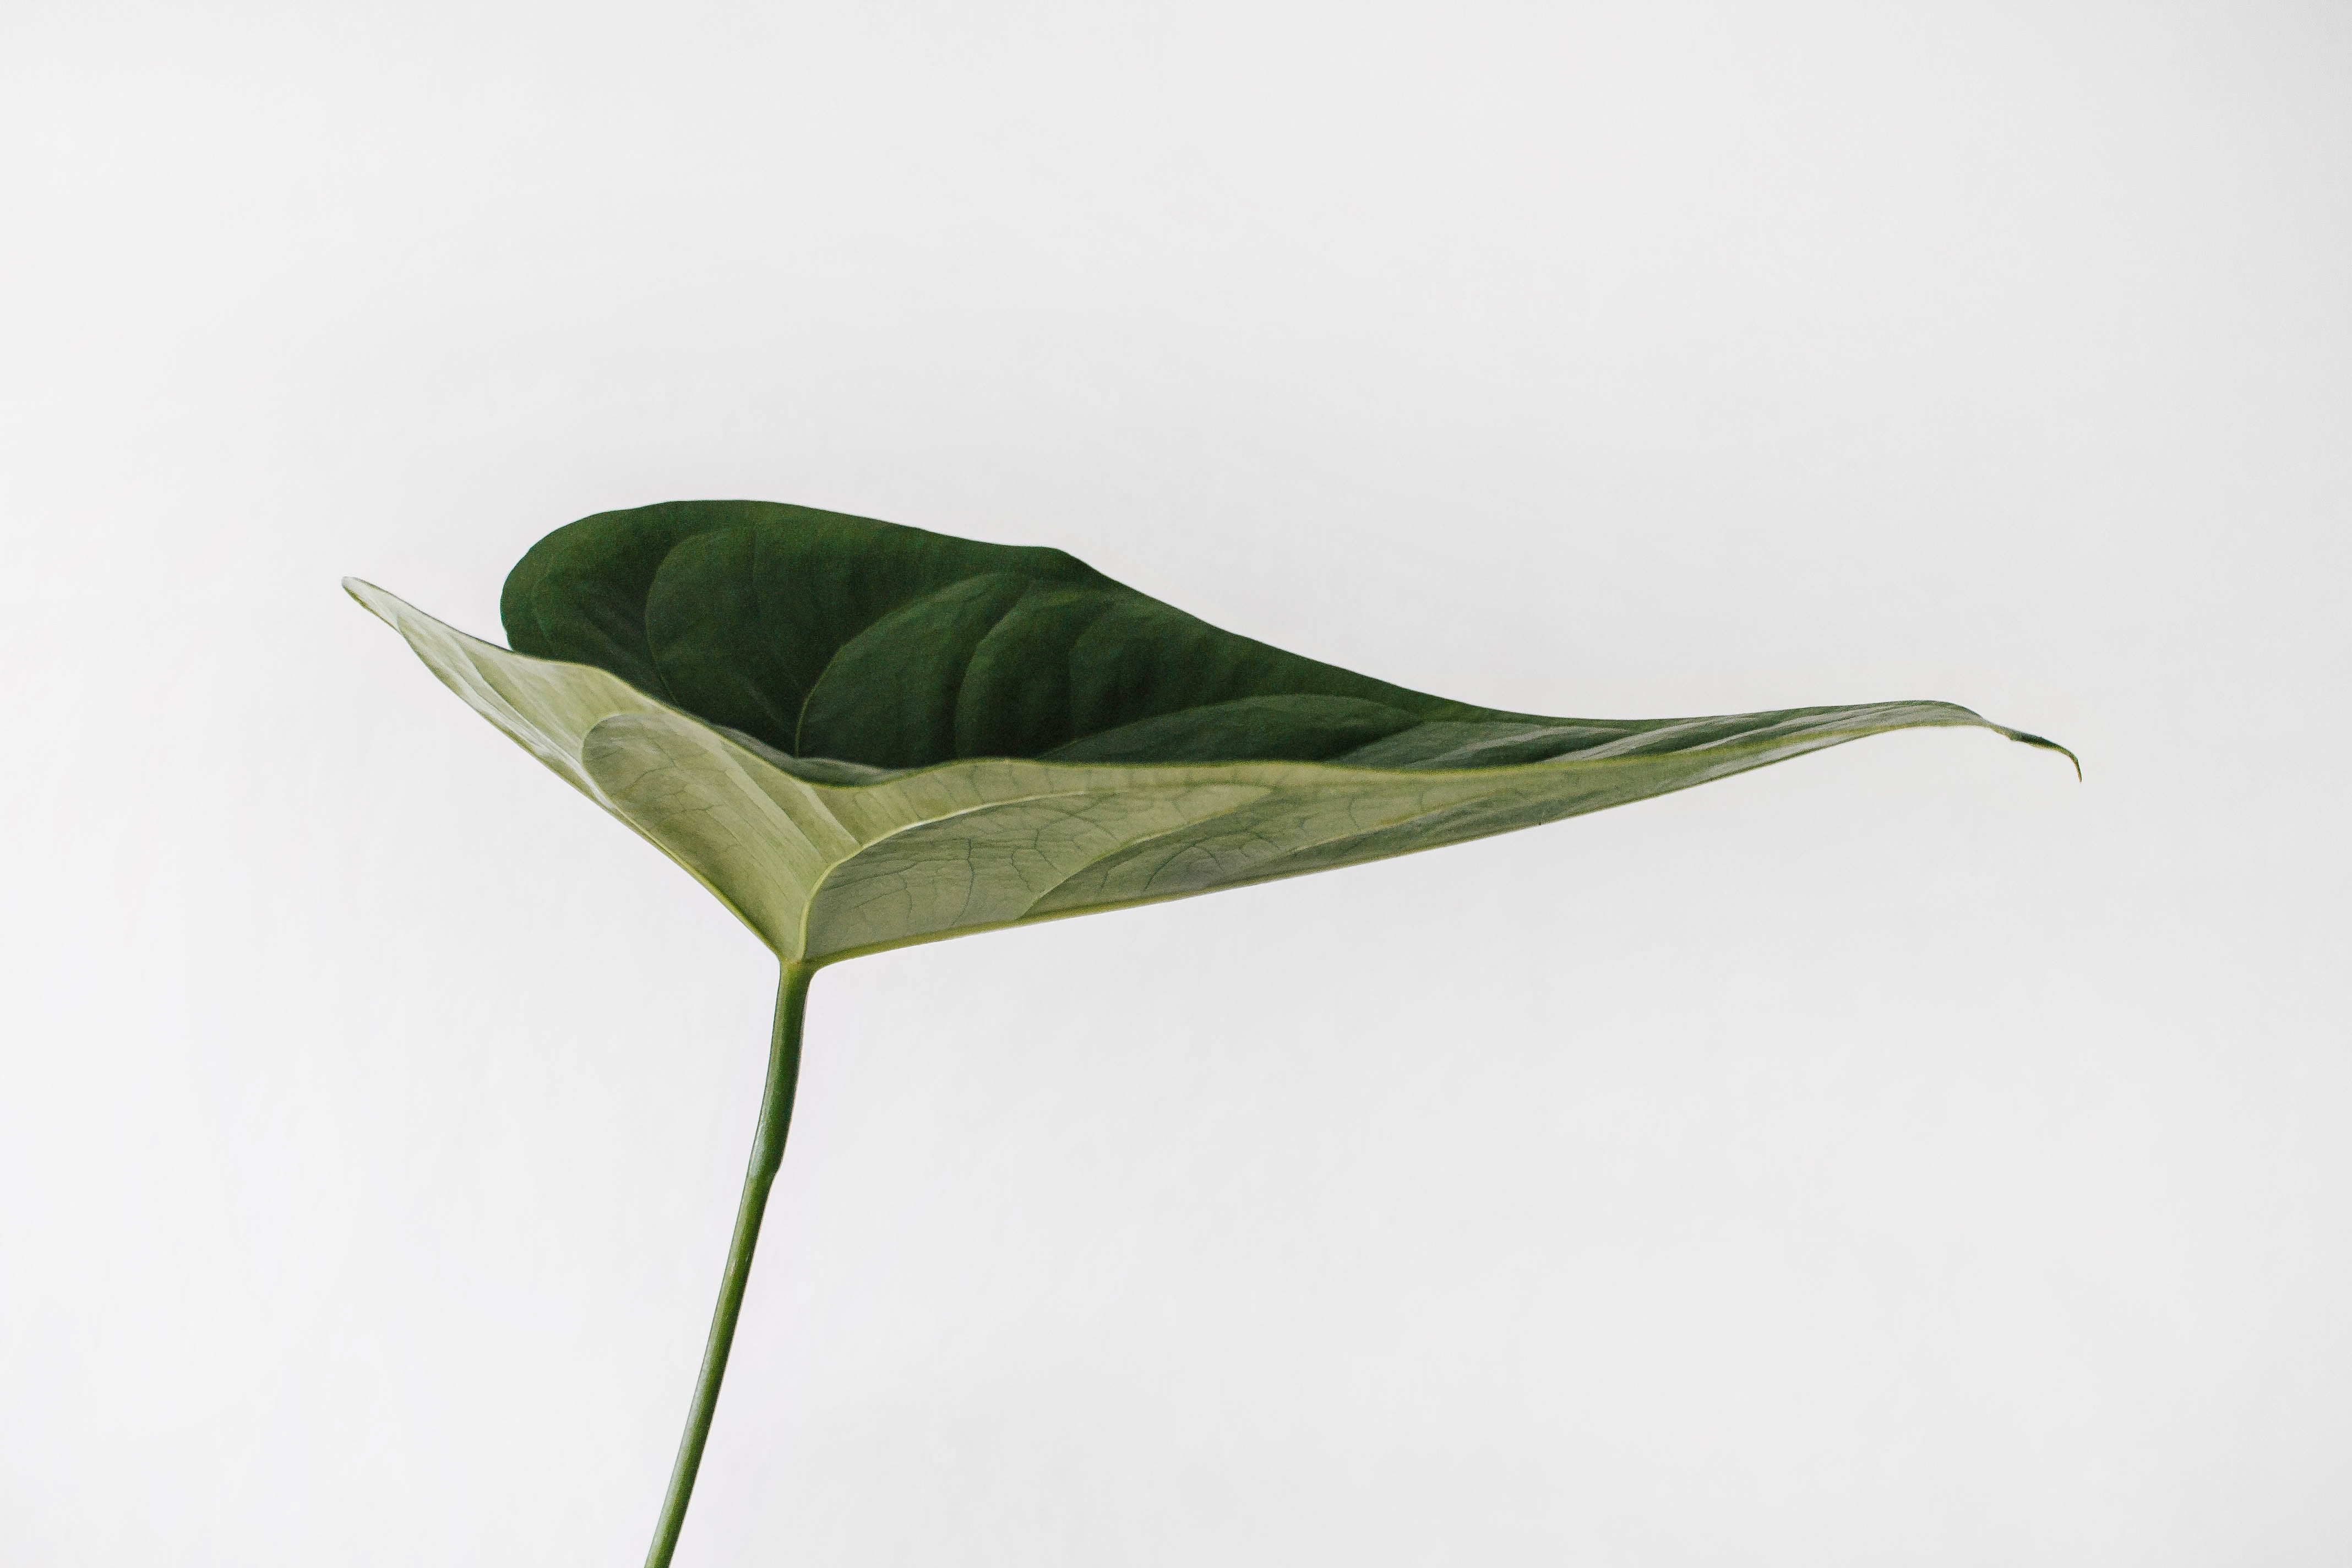 image of a single green leaf on a hite background